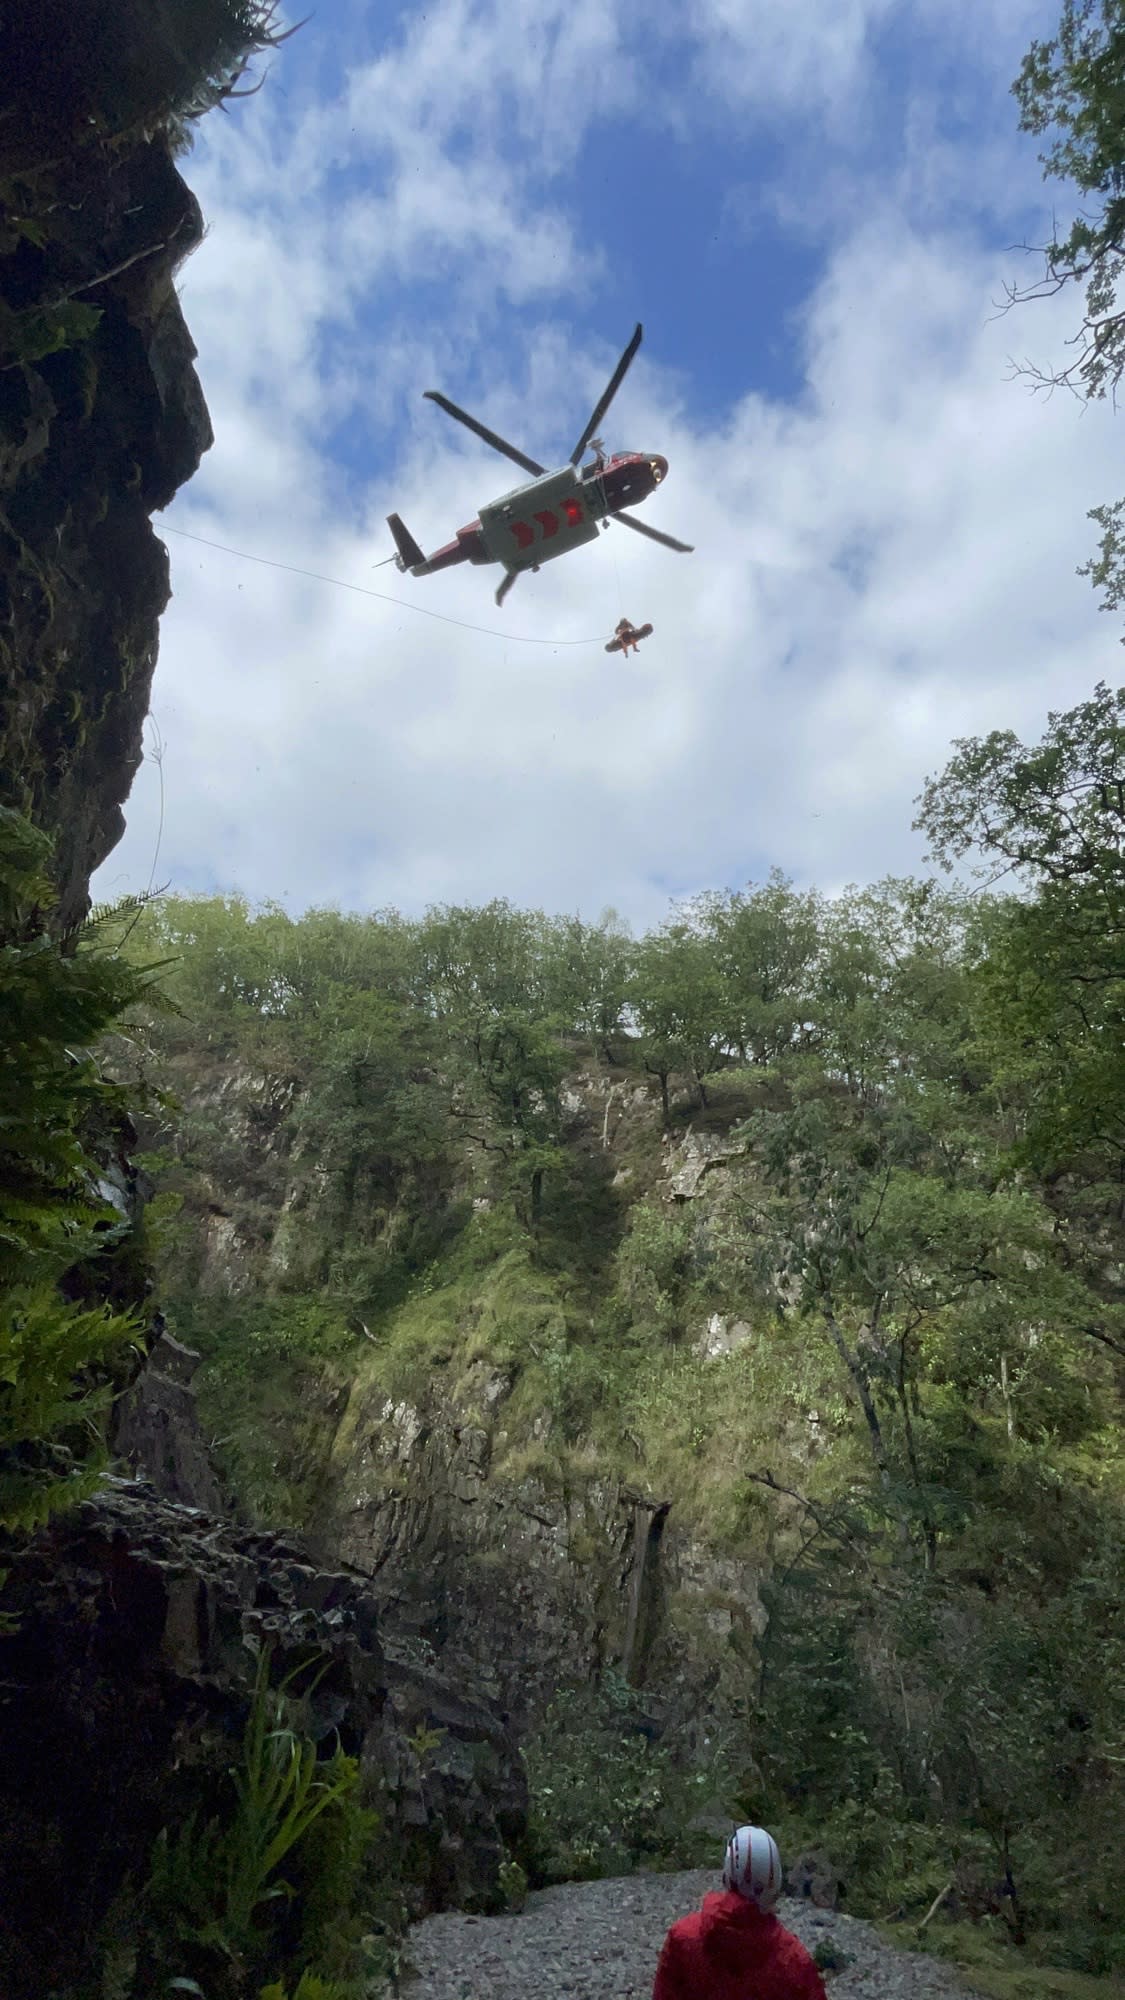 Sutton was airlifted to hospital from the ravine with serious injuries. (Reach)